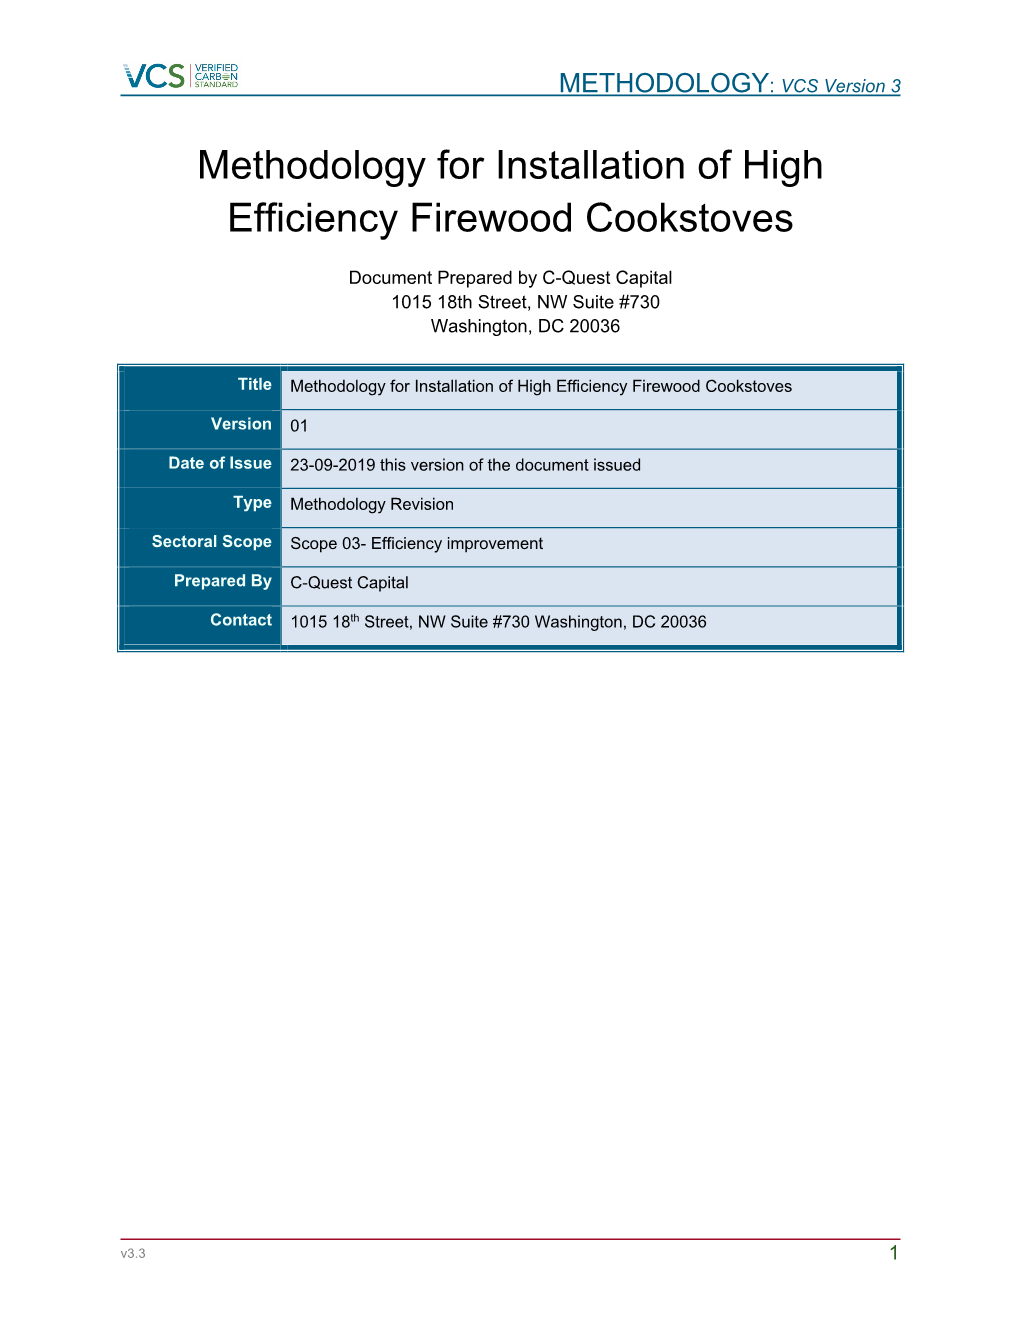 Methodology for Installation of High Efficiency Firewood Cookstoves 31DEC2019